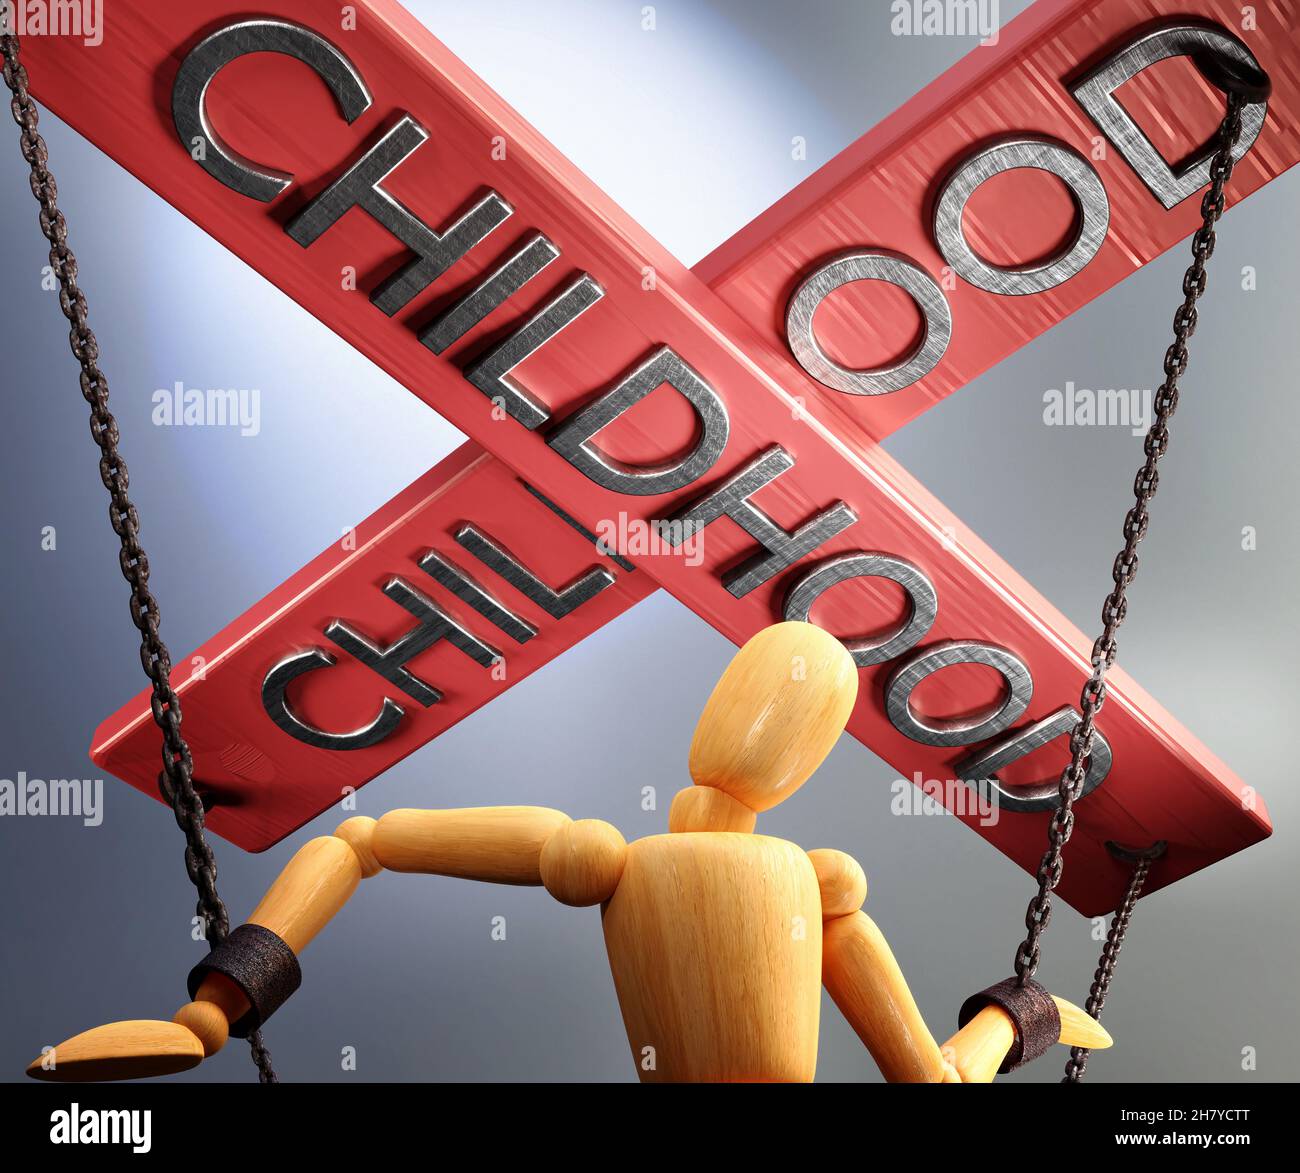 Childhood control, power, authority and manipulation symbolized by control bar with word Childhood pulling the strings (chains) of a wooden puppet, 3d Stock Photo